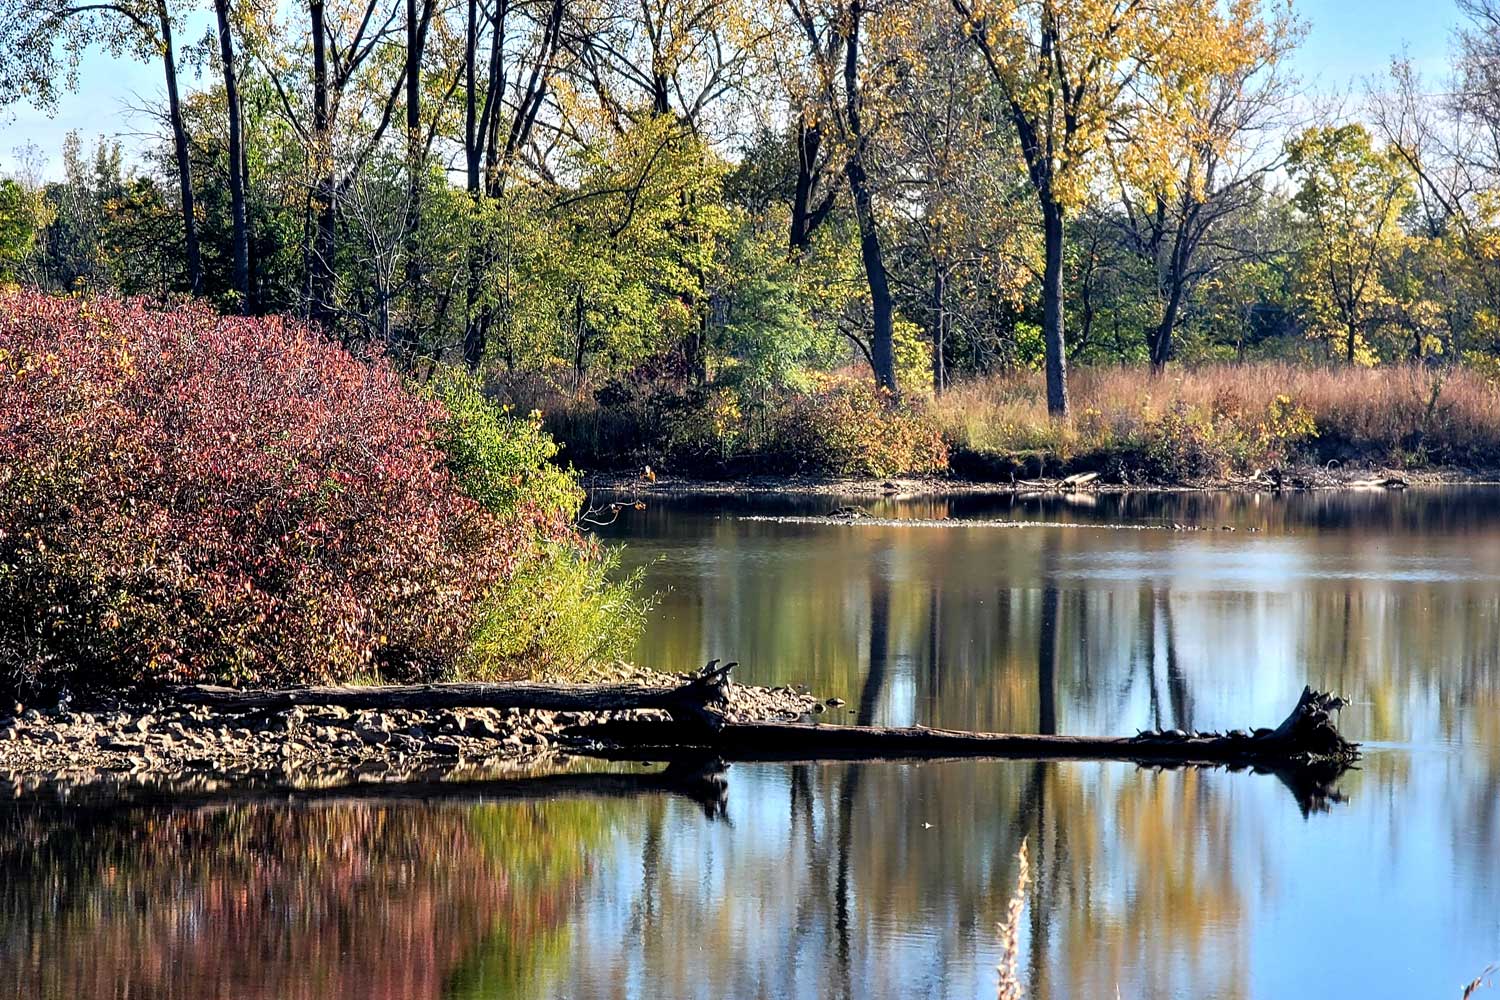 A pond in the fall, with trees with fallen leaves and others with red and yellow leaves. 